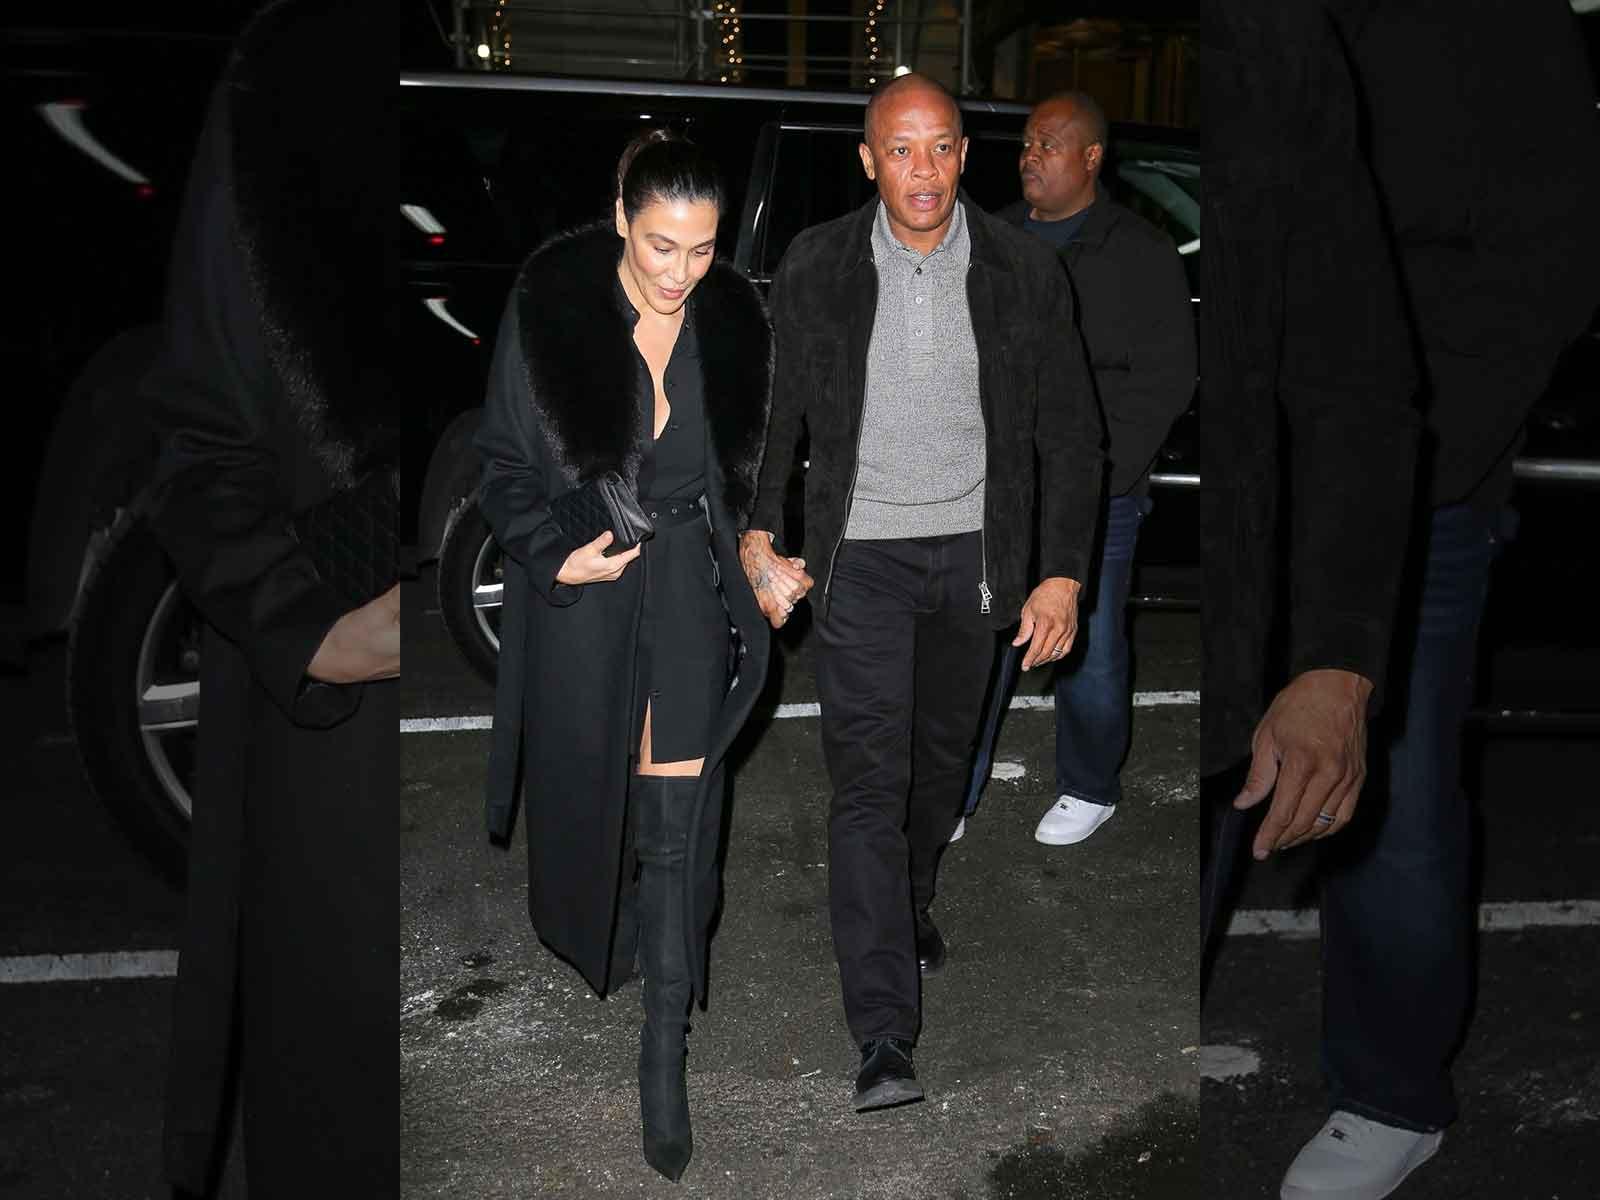 Dr. Dre Not Defiant, on Double Date with Jimmy Iovine